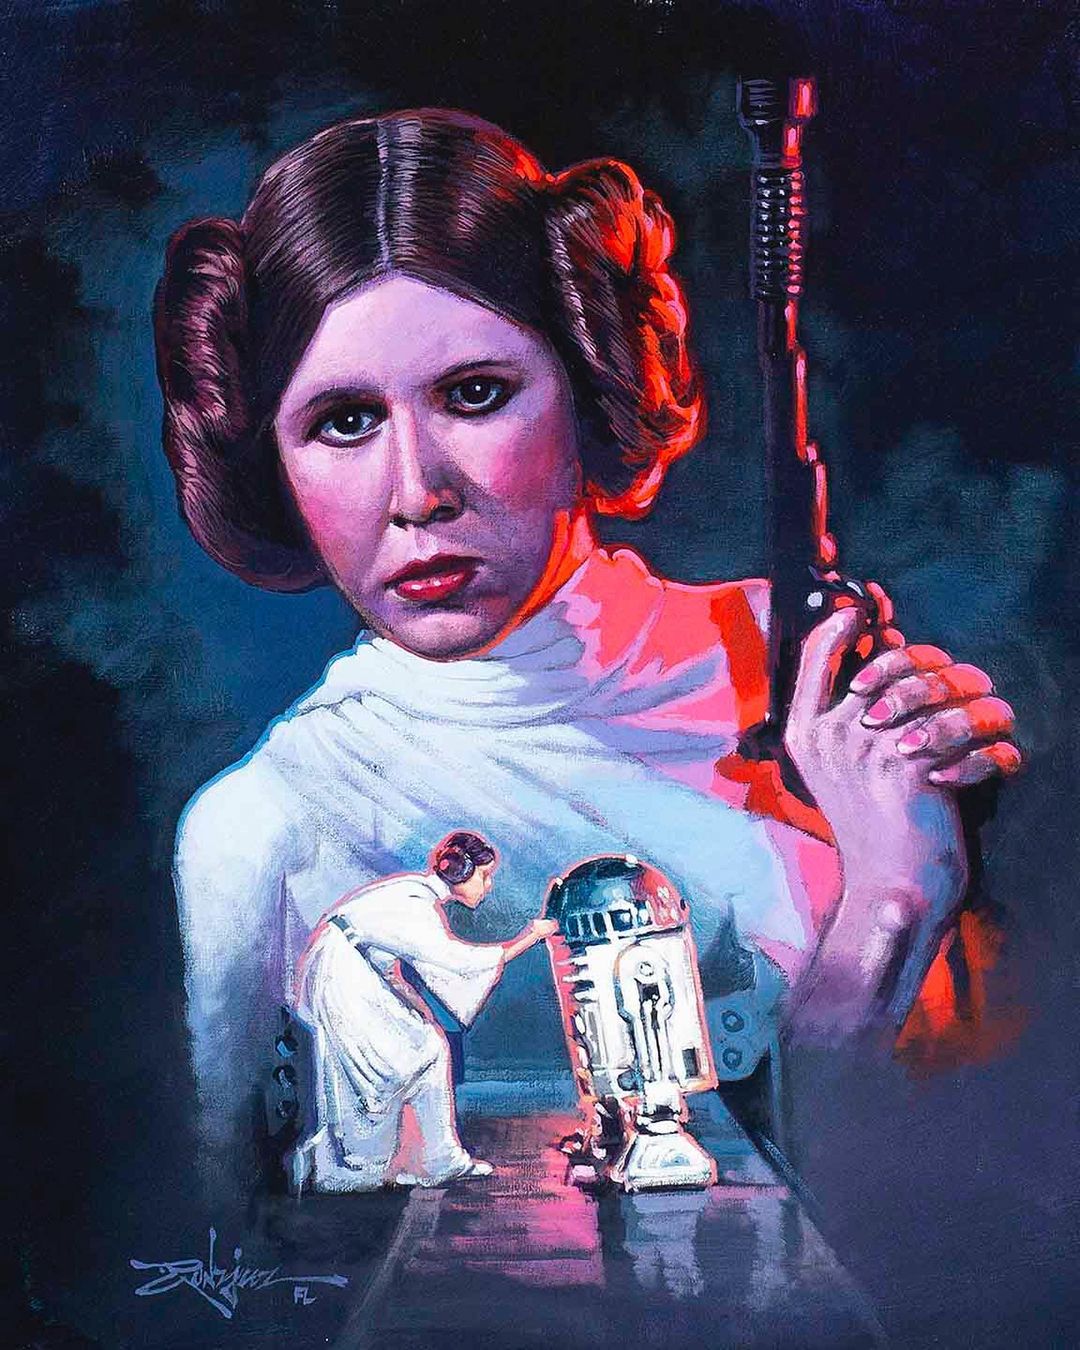 Another piece by Gonzalez featuring Princess Leia and R2-D2 from Star Wars